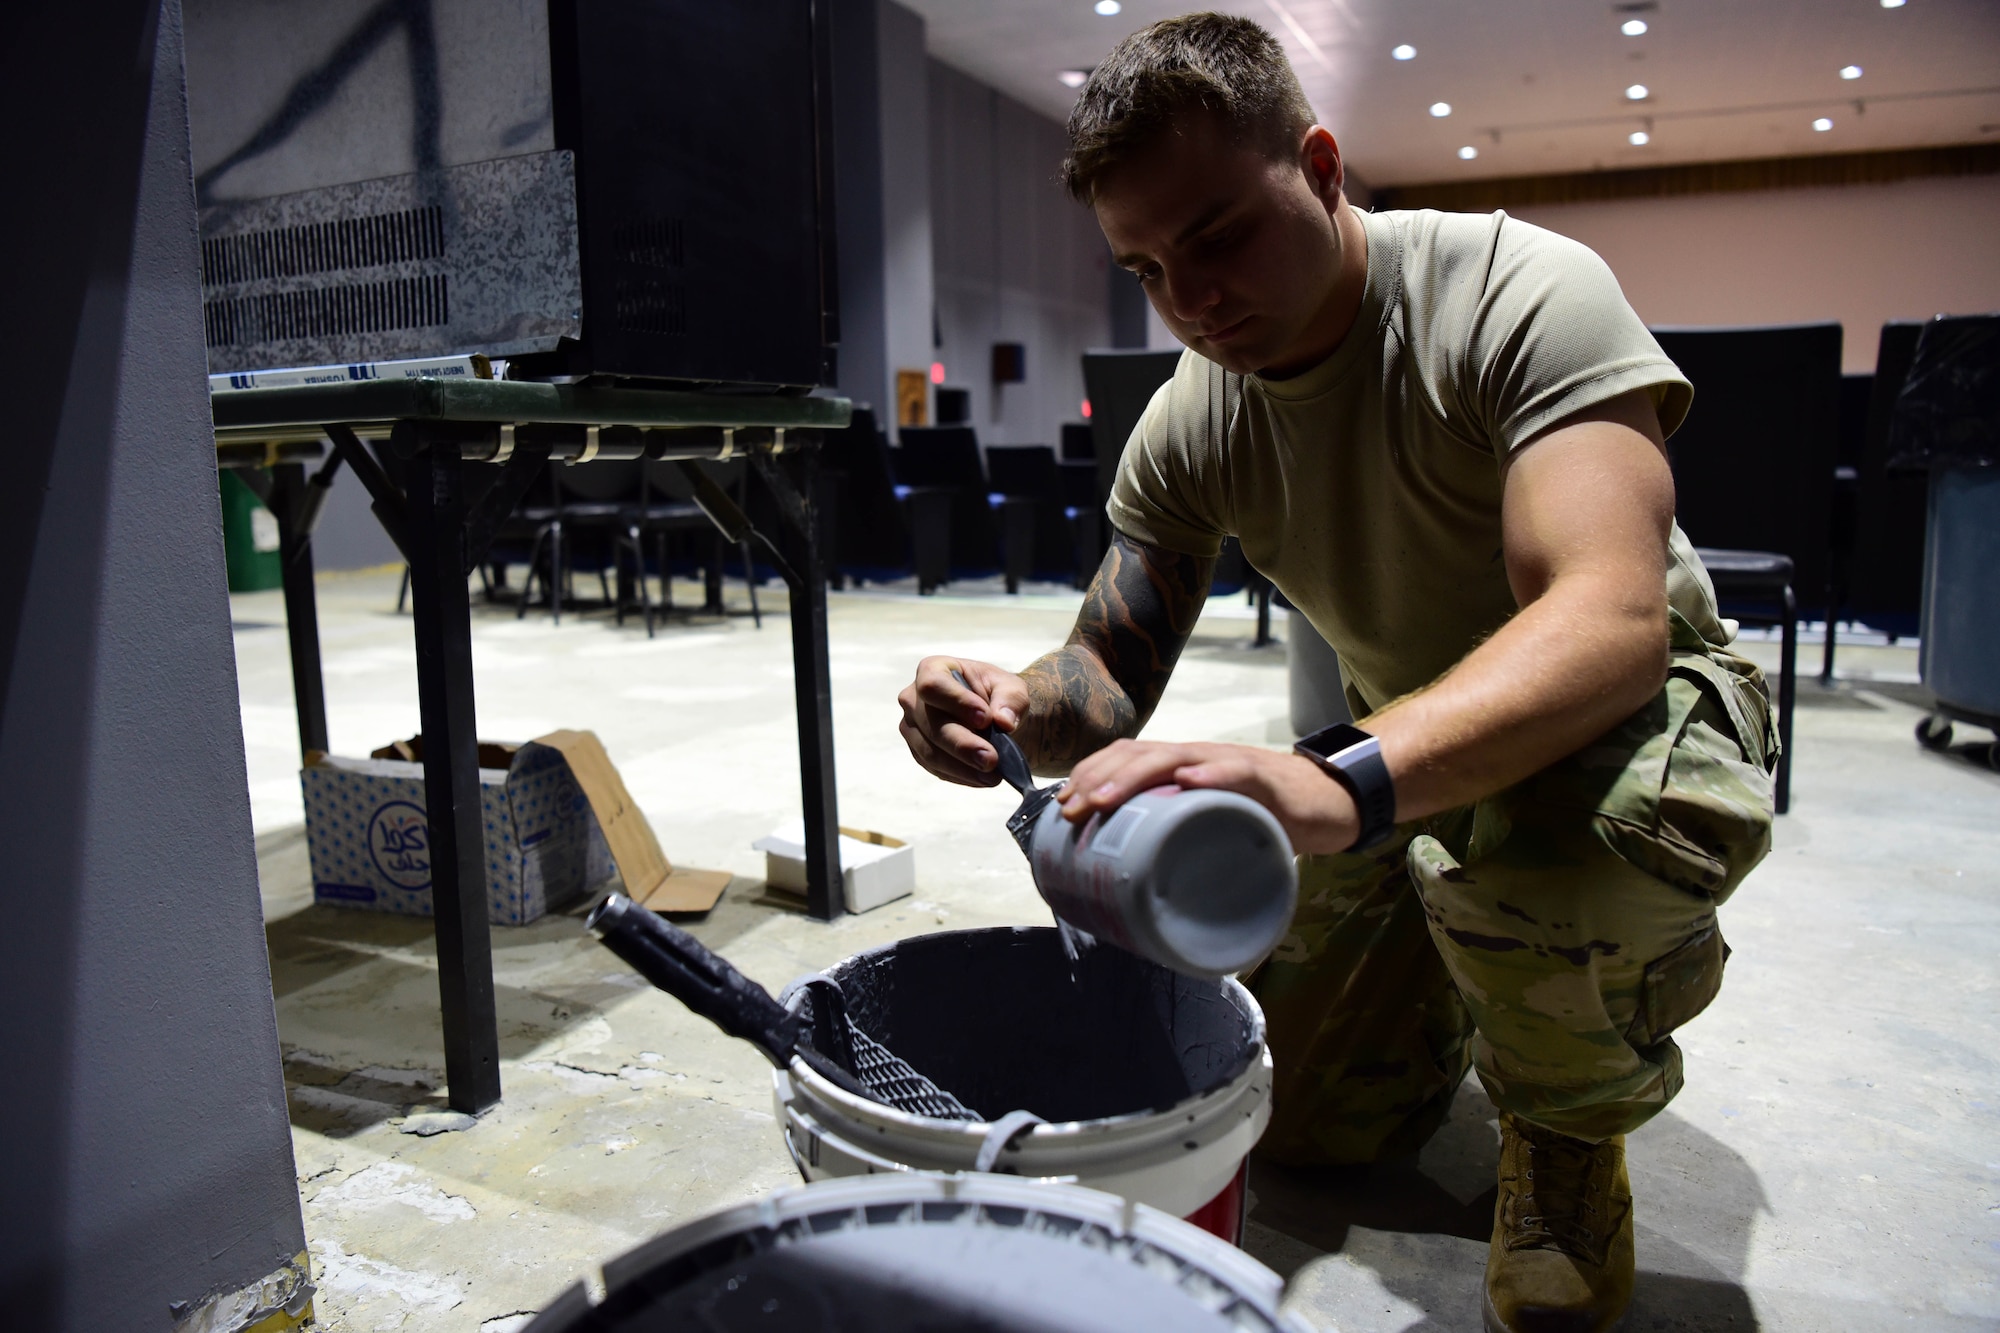 Staff Sgt. Nathan Russian, 386th Expeditionary Civil Engineer Squadron structures journeyman, cleans a paint brush Oct. 10, 2018, at an undisclosed location in Southwest Asia. Russian and his fellow structures journeymen are in the middle of renovating various facilities here at 'the Rock.' (U.S. Air Force photo by Staff Sgt. Christopher Stoltz)